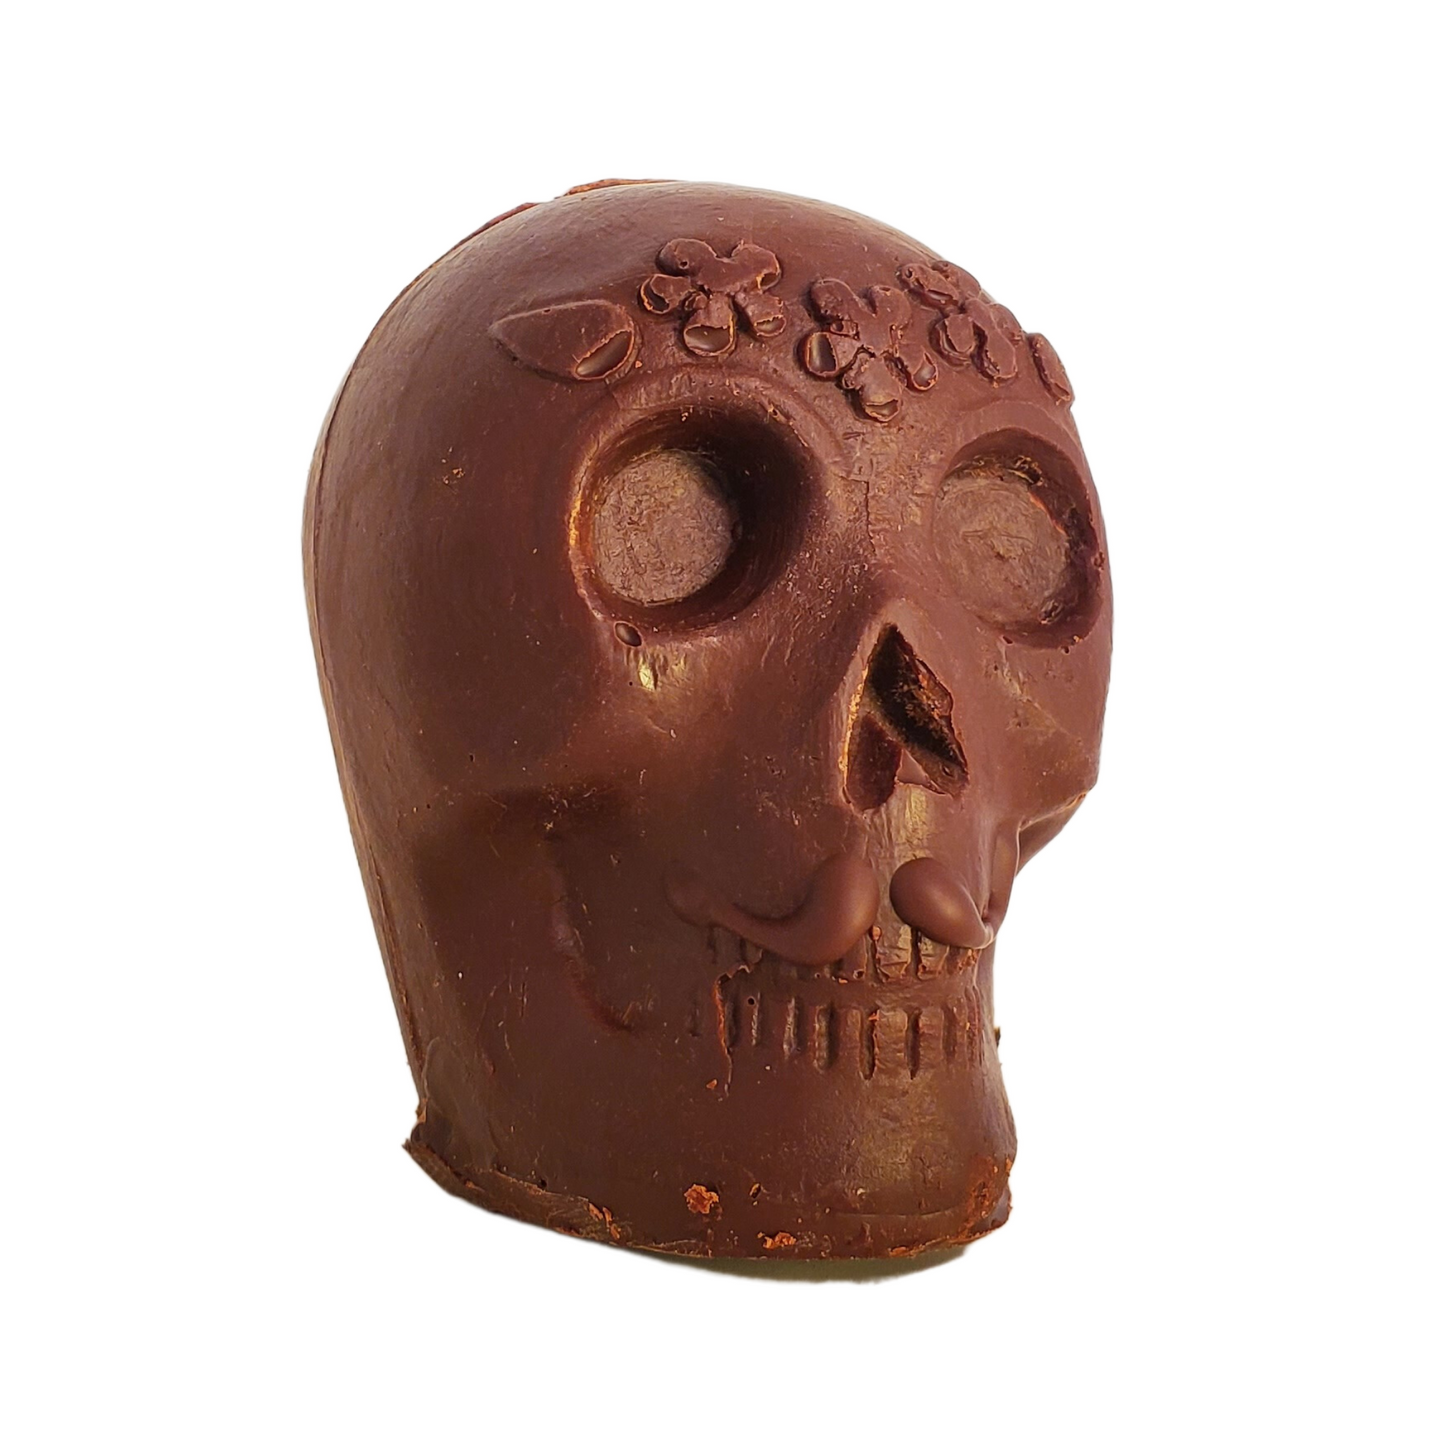 Chocolate skull figurine with a chocolate moustache and flower headband decoration.